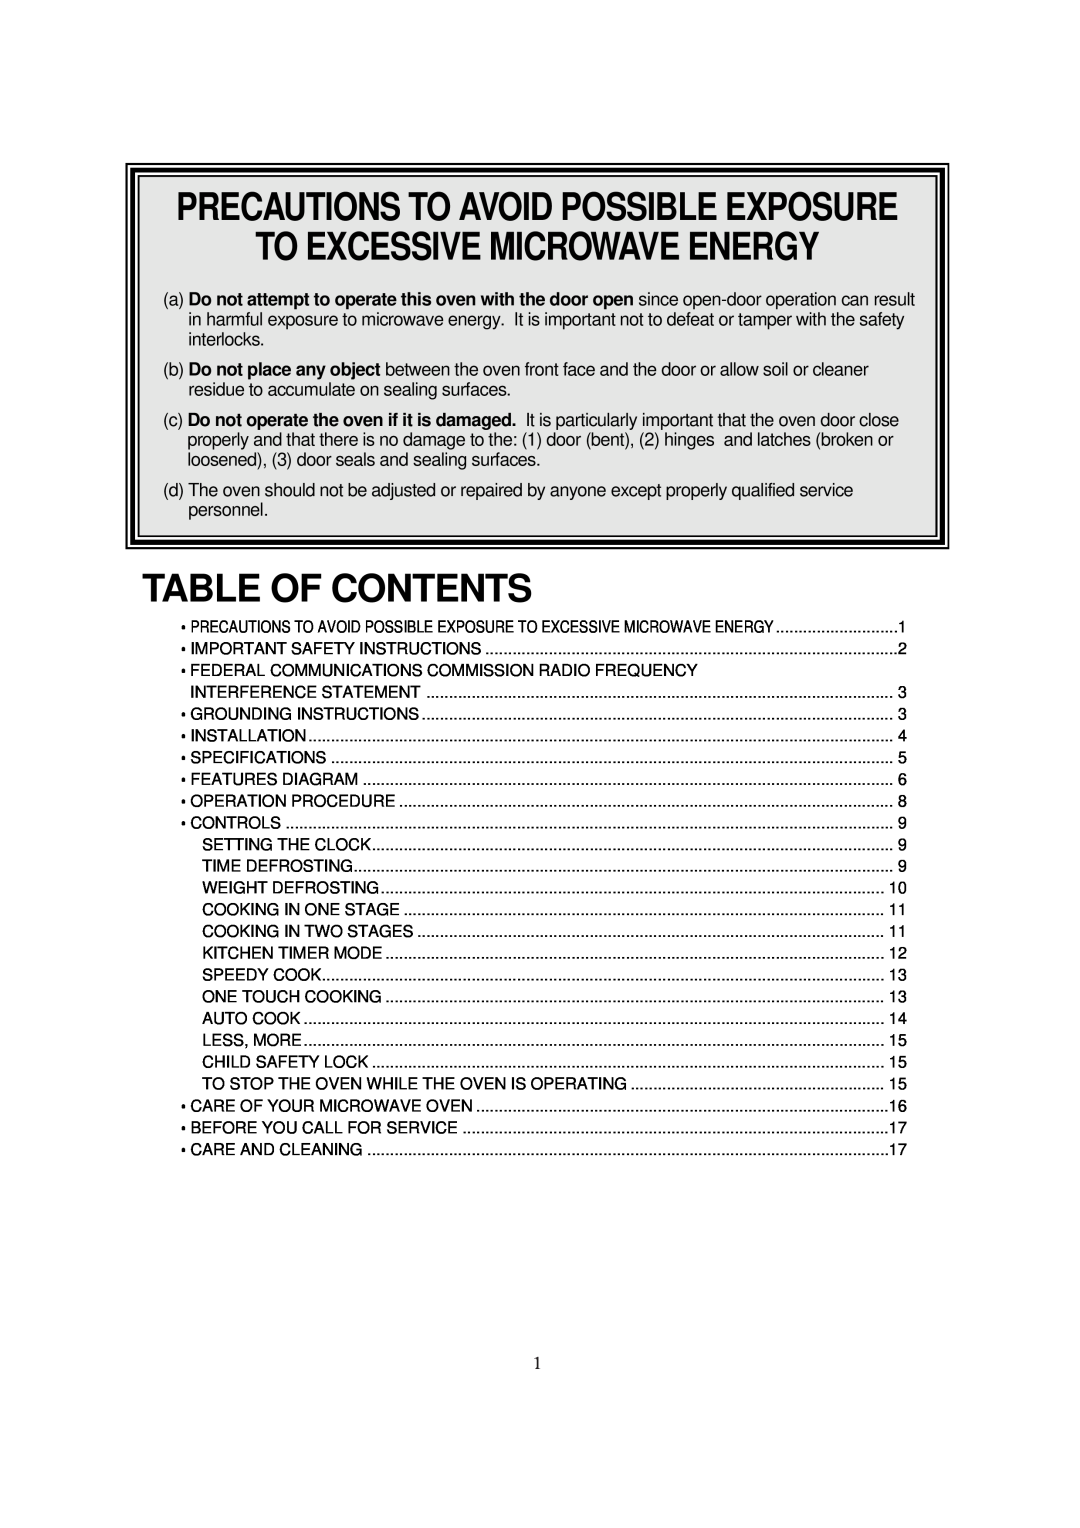 Magic Chef MCD990WF, MCD990BF Precautions To Avoid Possible Exposure To Excessive Microwave Energy, Table Of Contents 